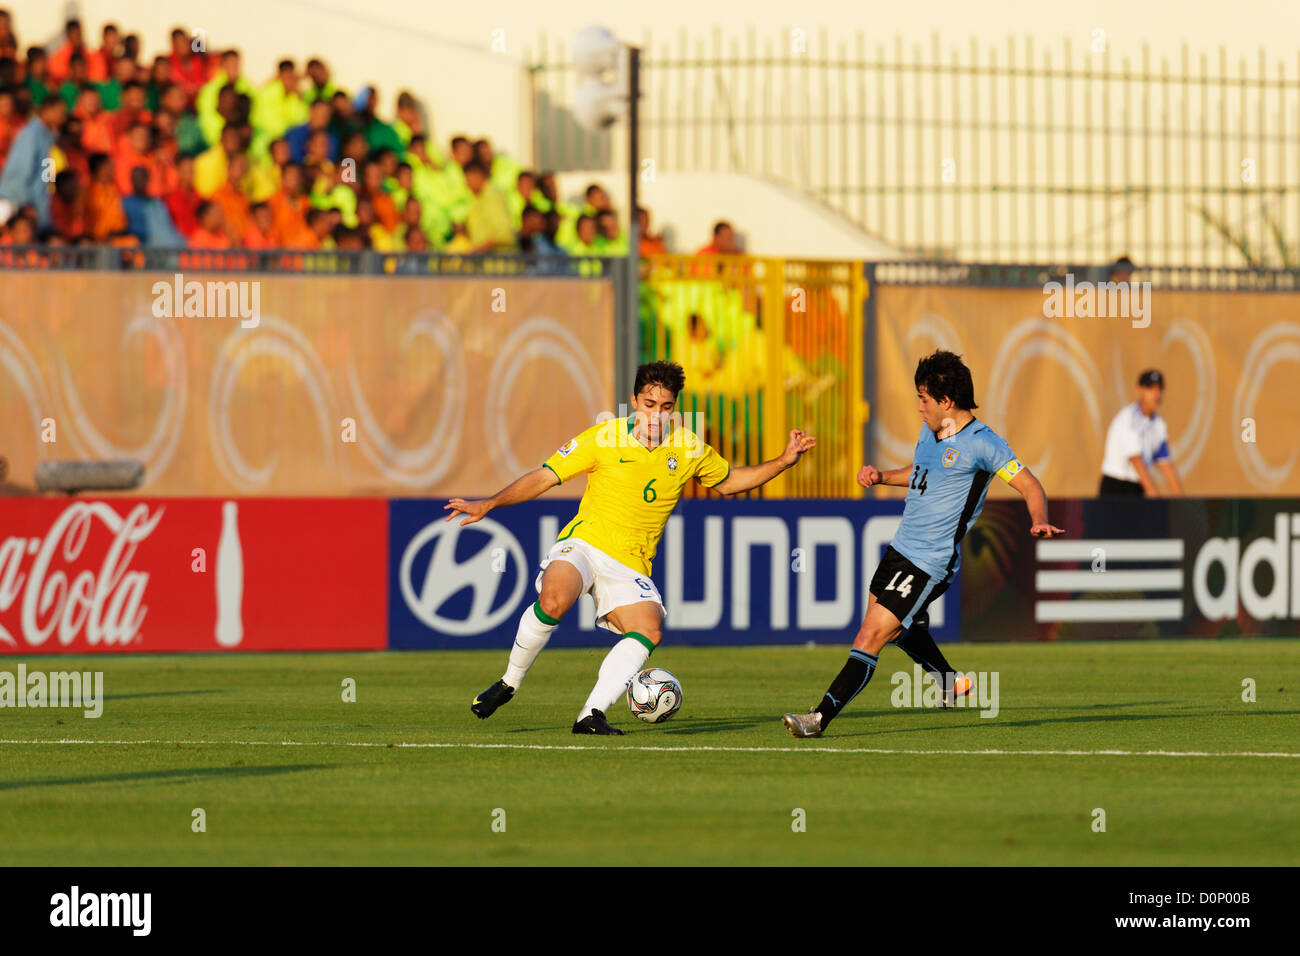 Diogo of Brazil (6) in action against Nicolas Lodeiro of Uruguay during the 2009 FIFA U-20 World Cup round of 16 match. Stock Photo